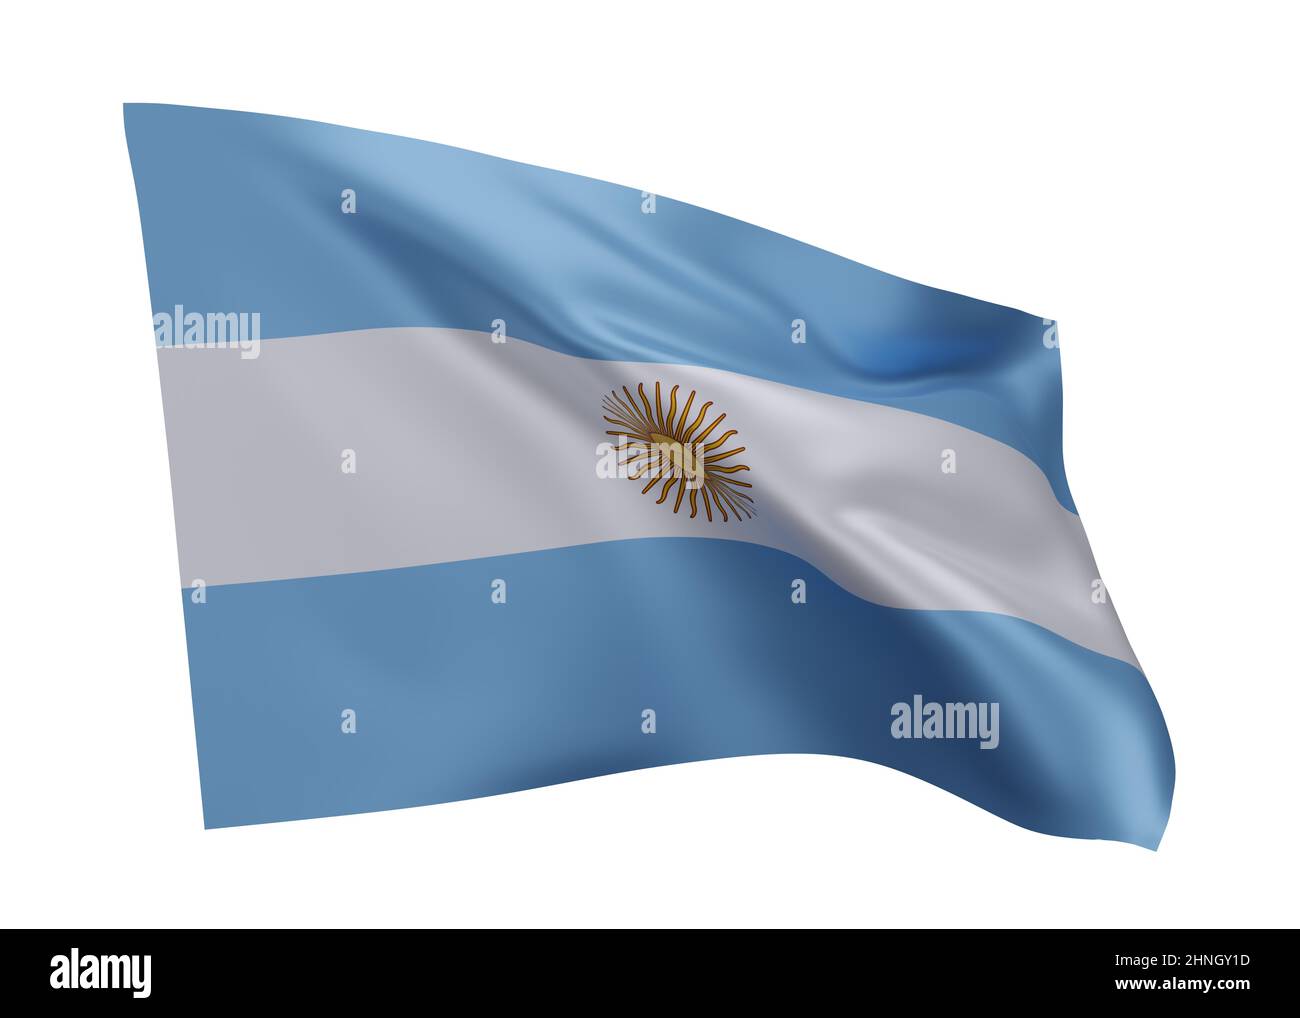 3d illustration flag of Argentina. Argentinean high resolution flag isolated against white background. 3d rendering Stock Photo